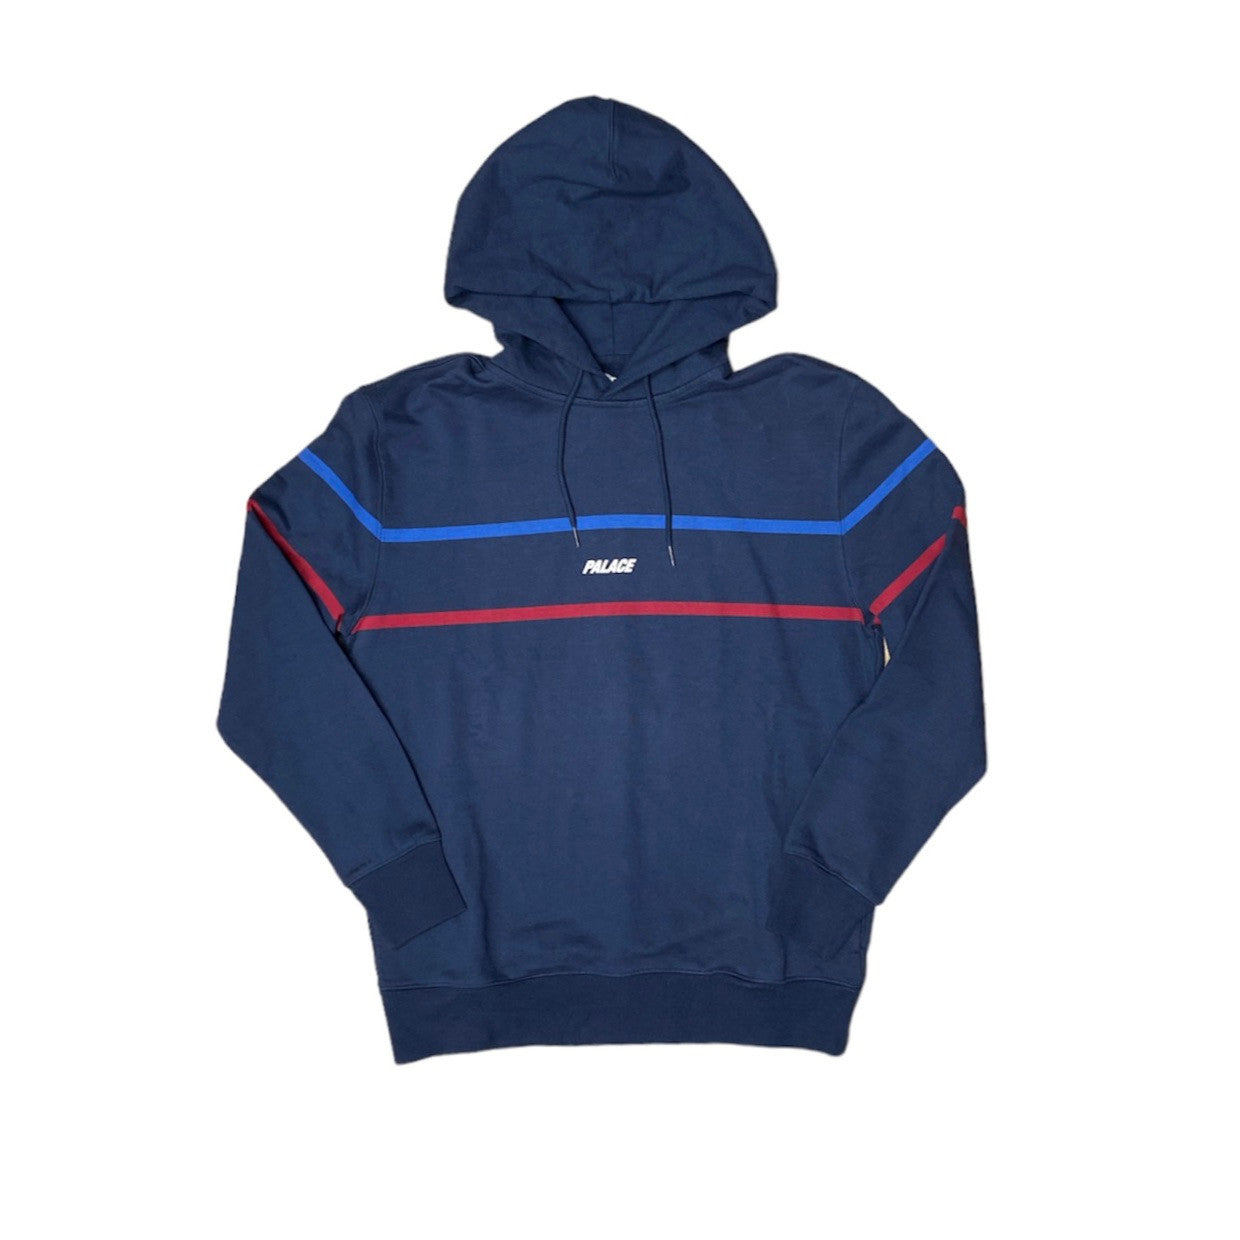 Palace Double Ripe Navy Hoodie